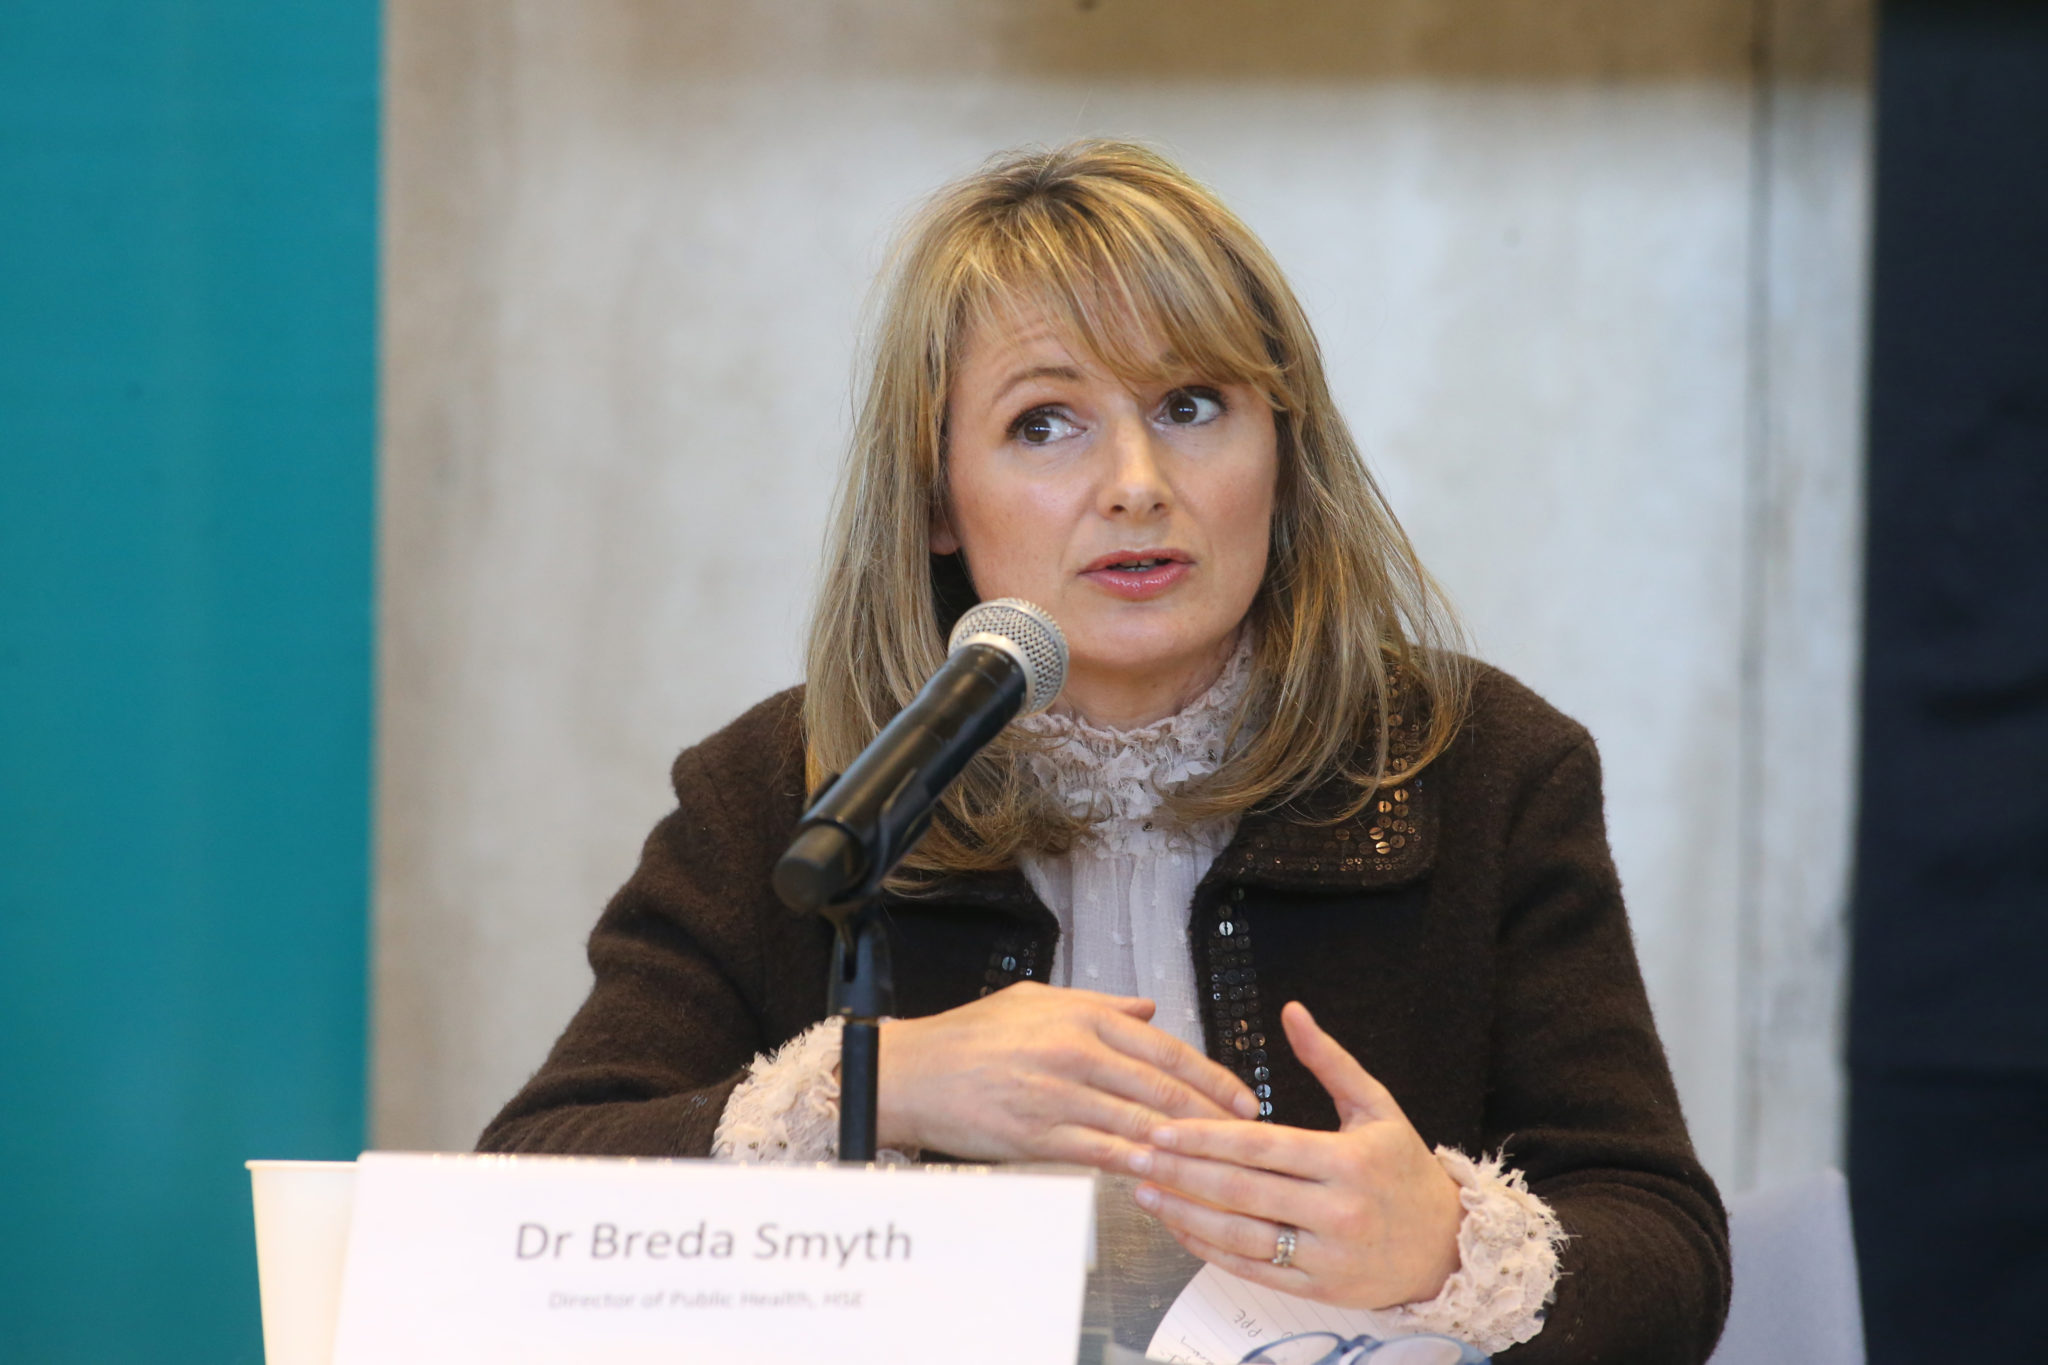 Breda Smyth is seen in April 2020 at a briefing of the National Public Health Emergency Team (NPHET) in the Department of Health.